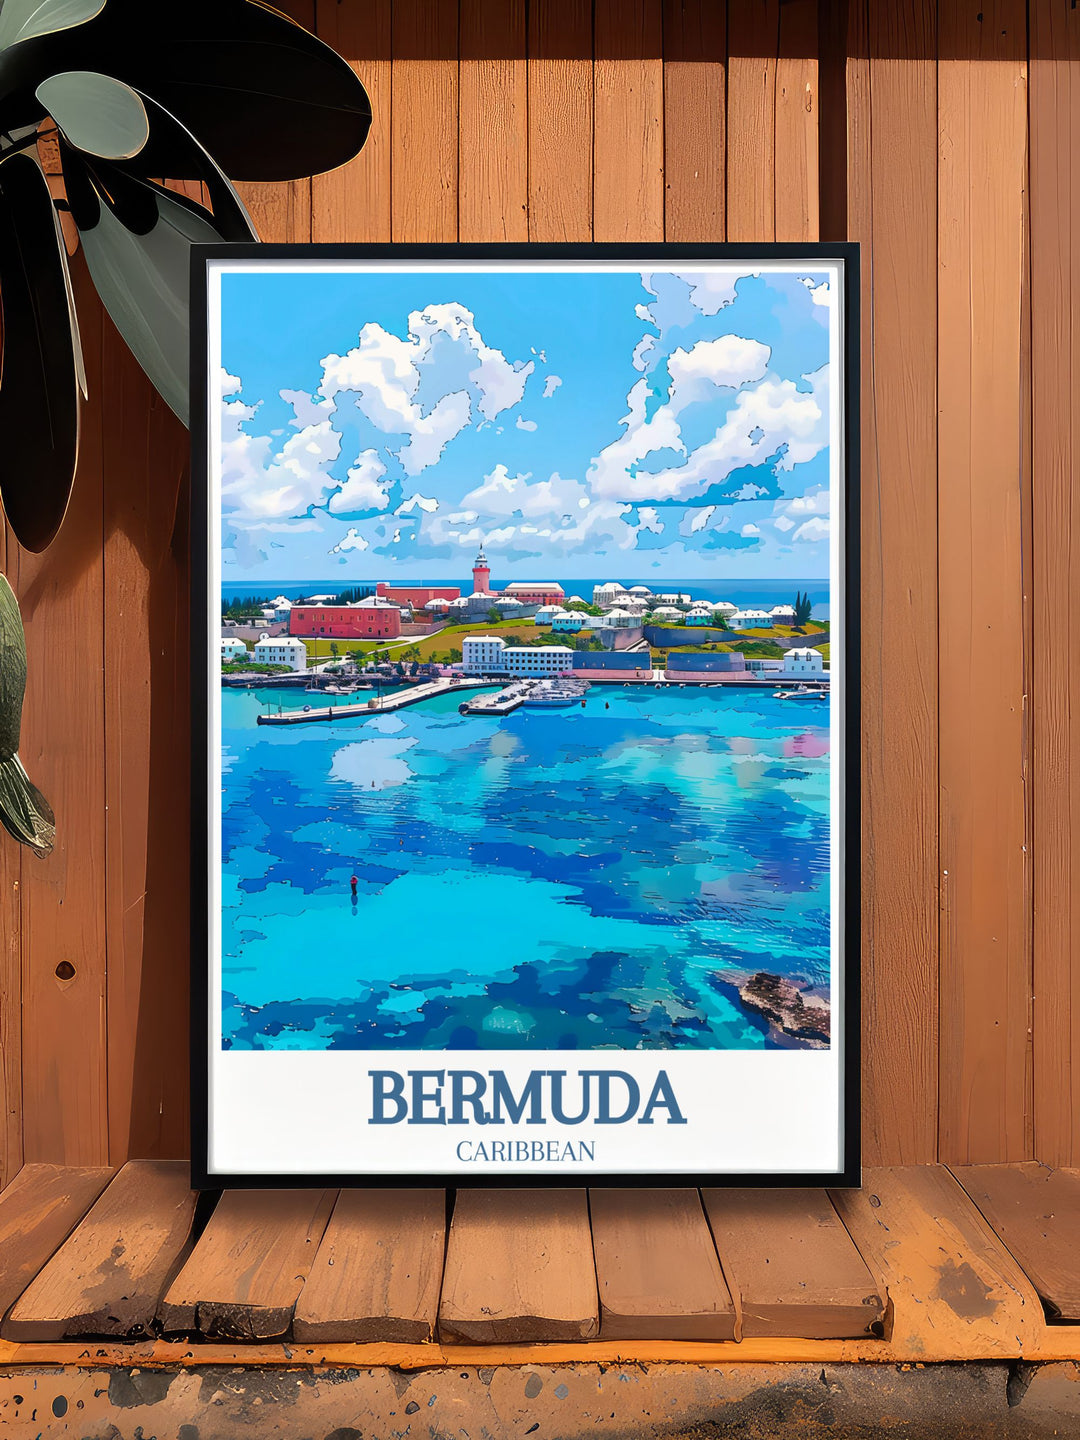 Unique artwork of Bermuda featuring St. Georges Town and St. Peters Church, perfect for personalized gifts or home decor. This print captures the essence of Bermudas historic and scenic landmarks.